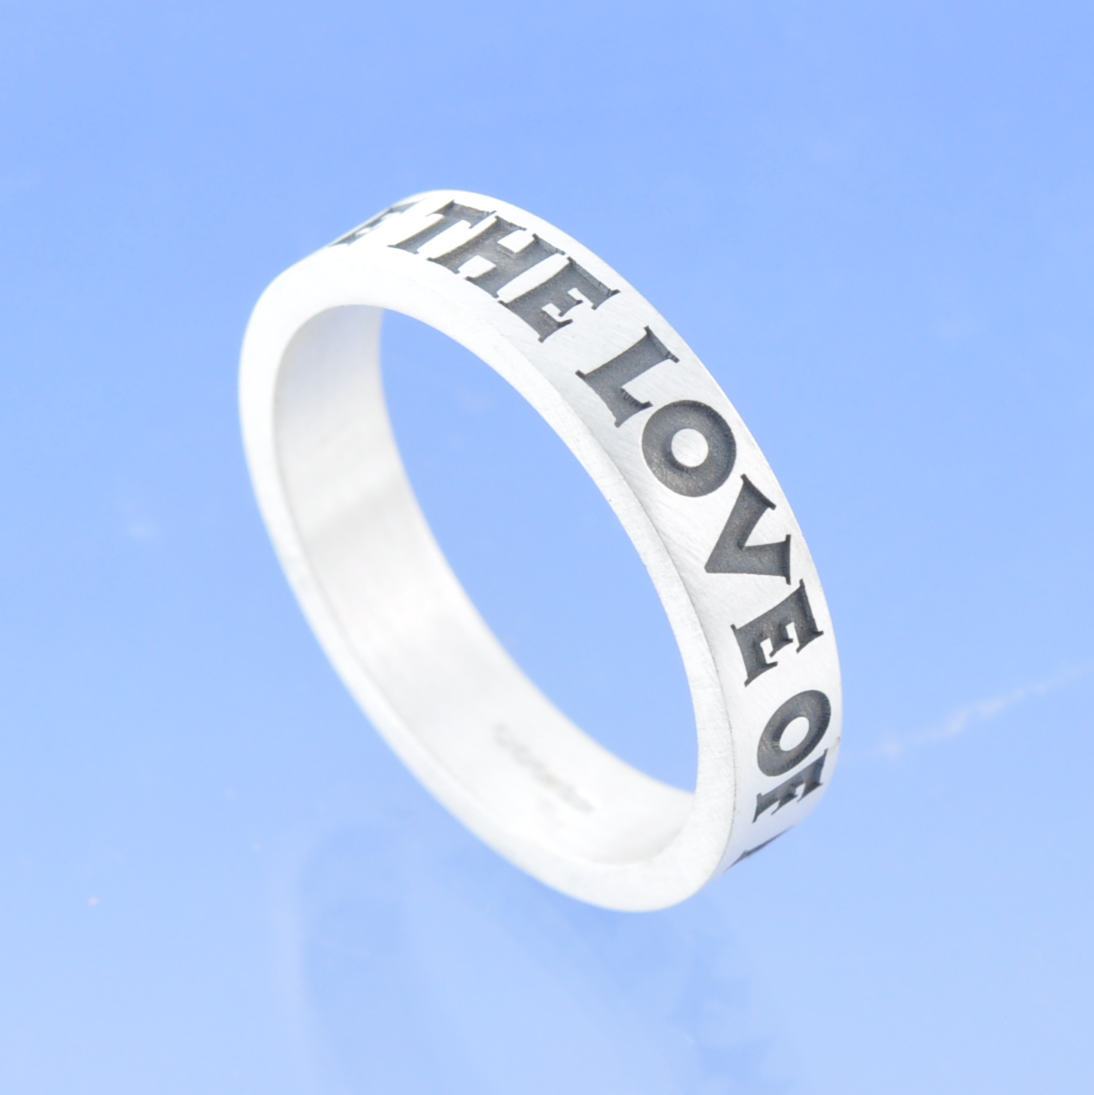 4mm Personalised Flat Ring Ring by Chris Parry Jewellery